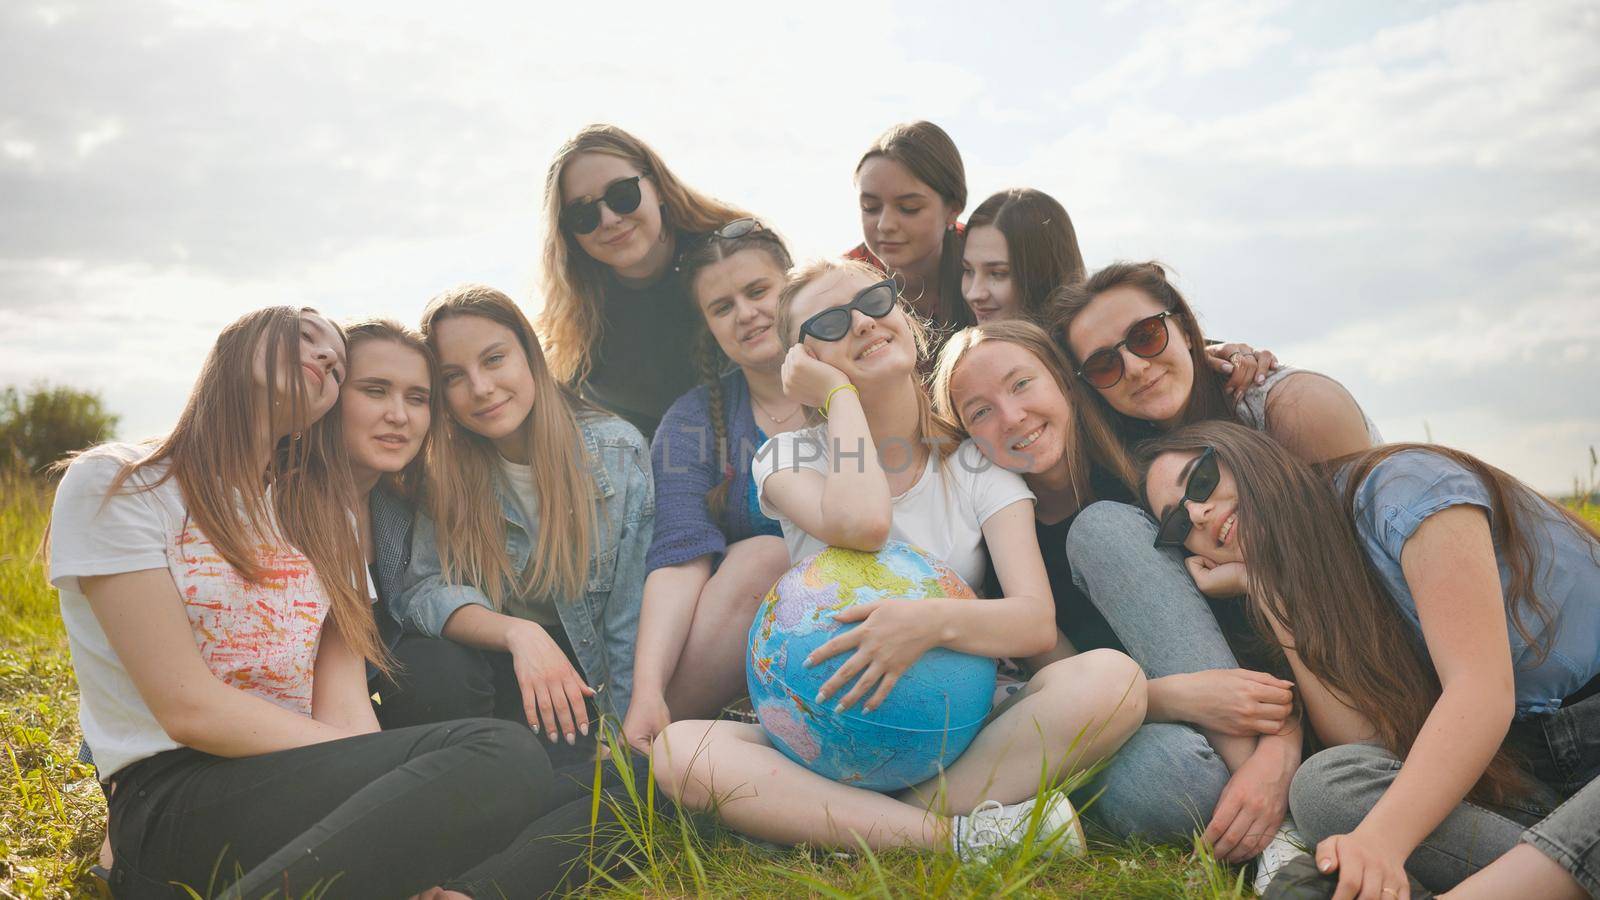 A group of cheerful girls is exploring the globe of the world in the meadow. by DovidPro